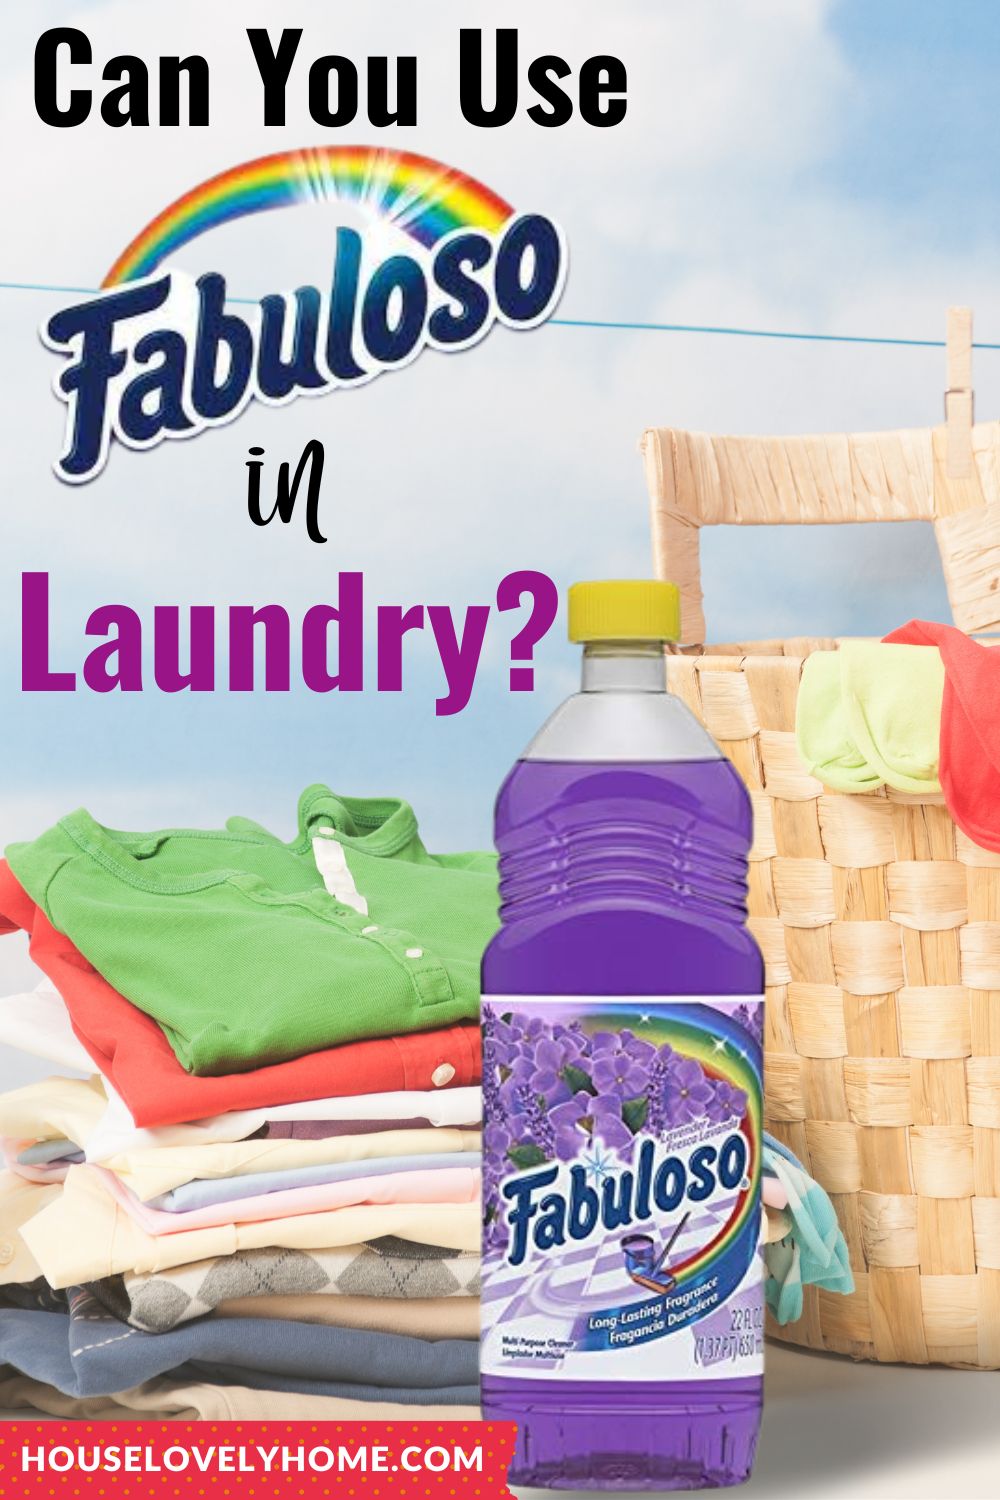 Can You Use Fabuloso in Laundry?